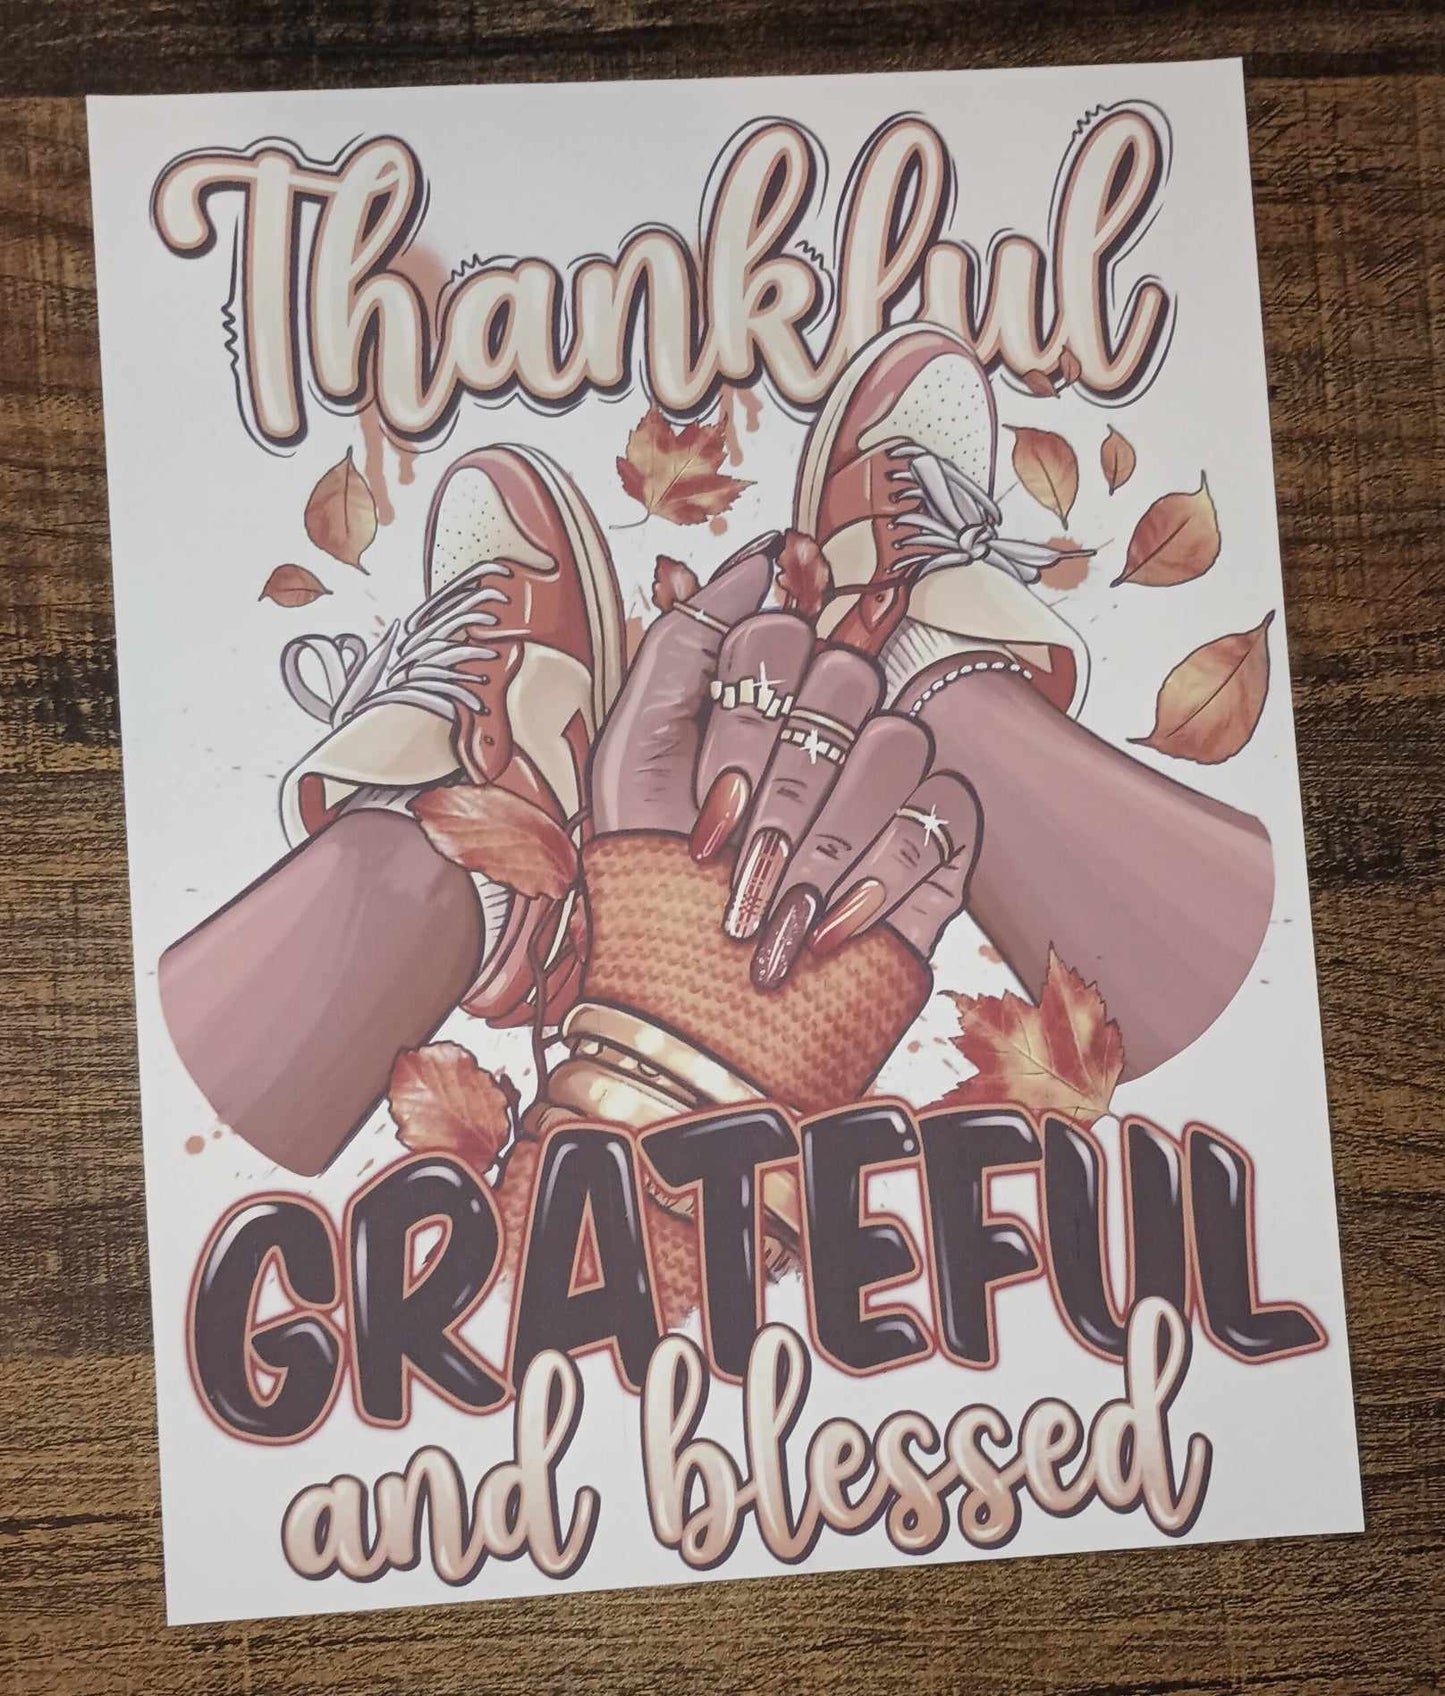 Thankful, Grateful & Blessed Sublimation Transfer (8.5X11)